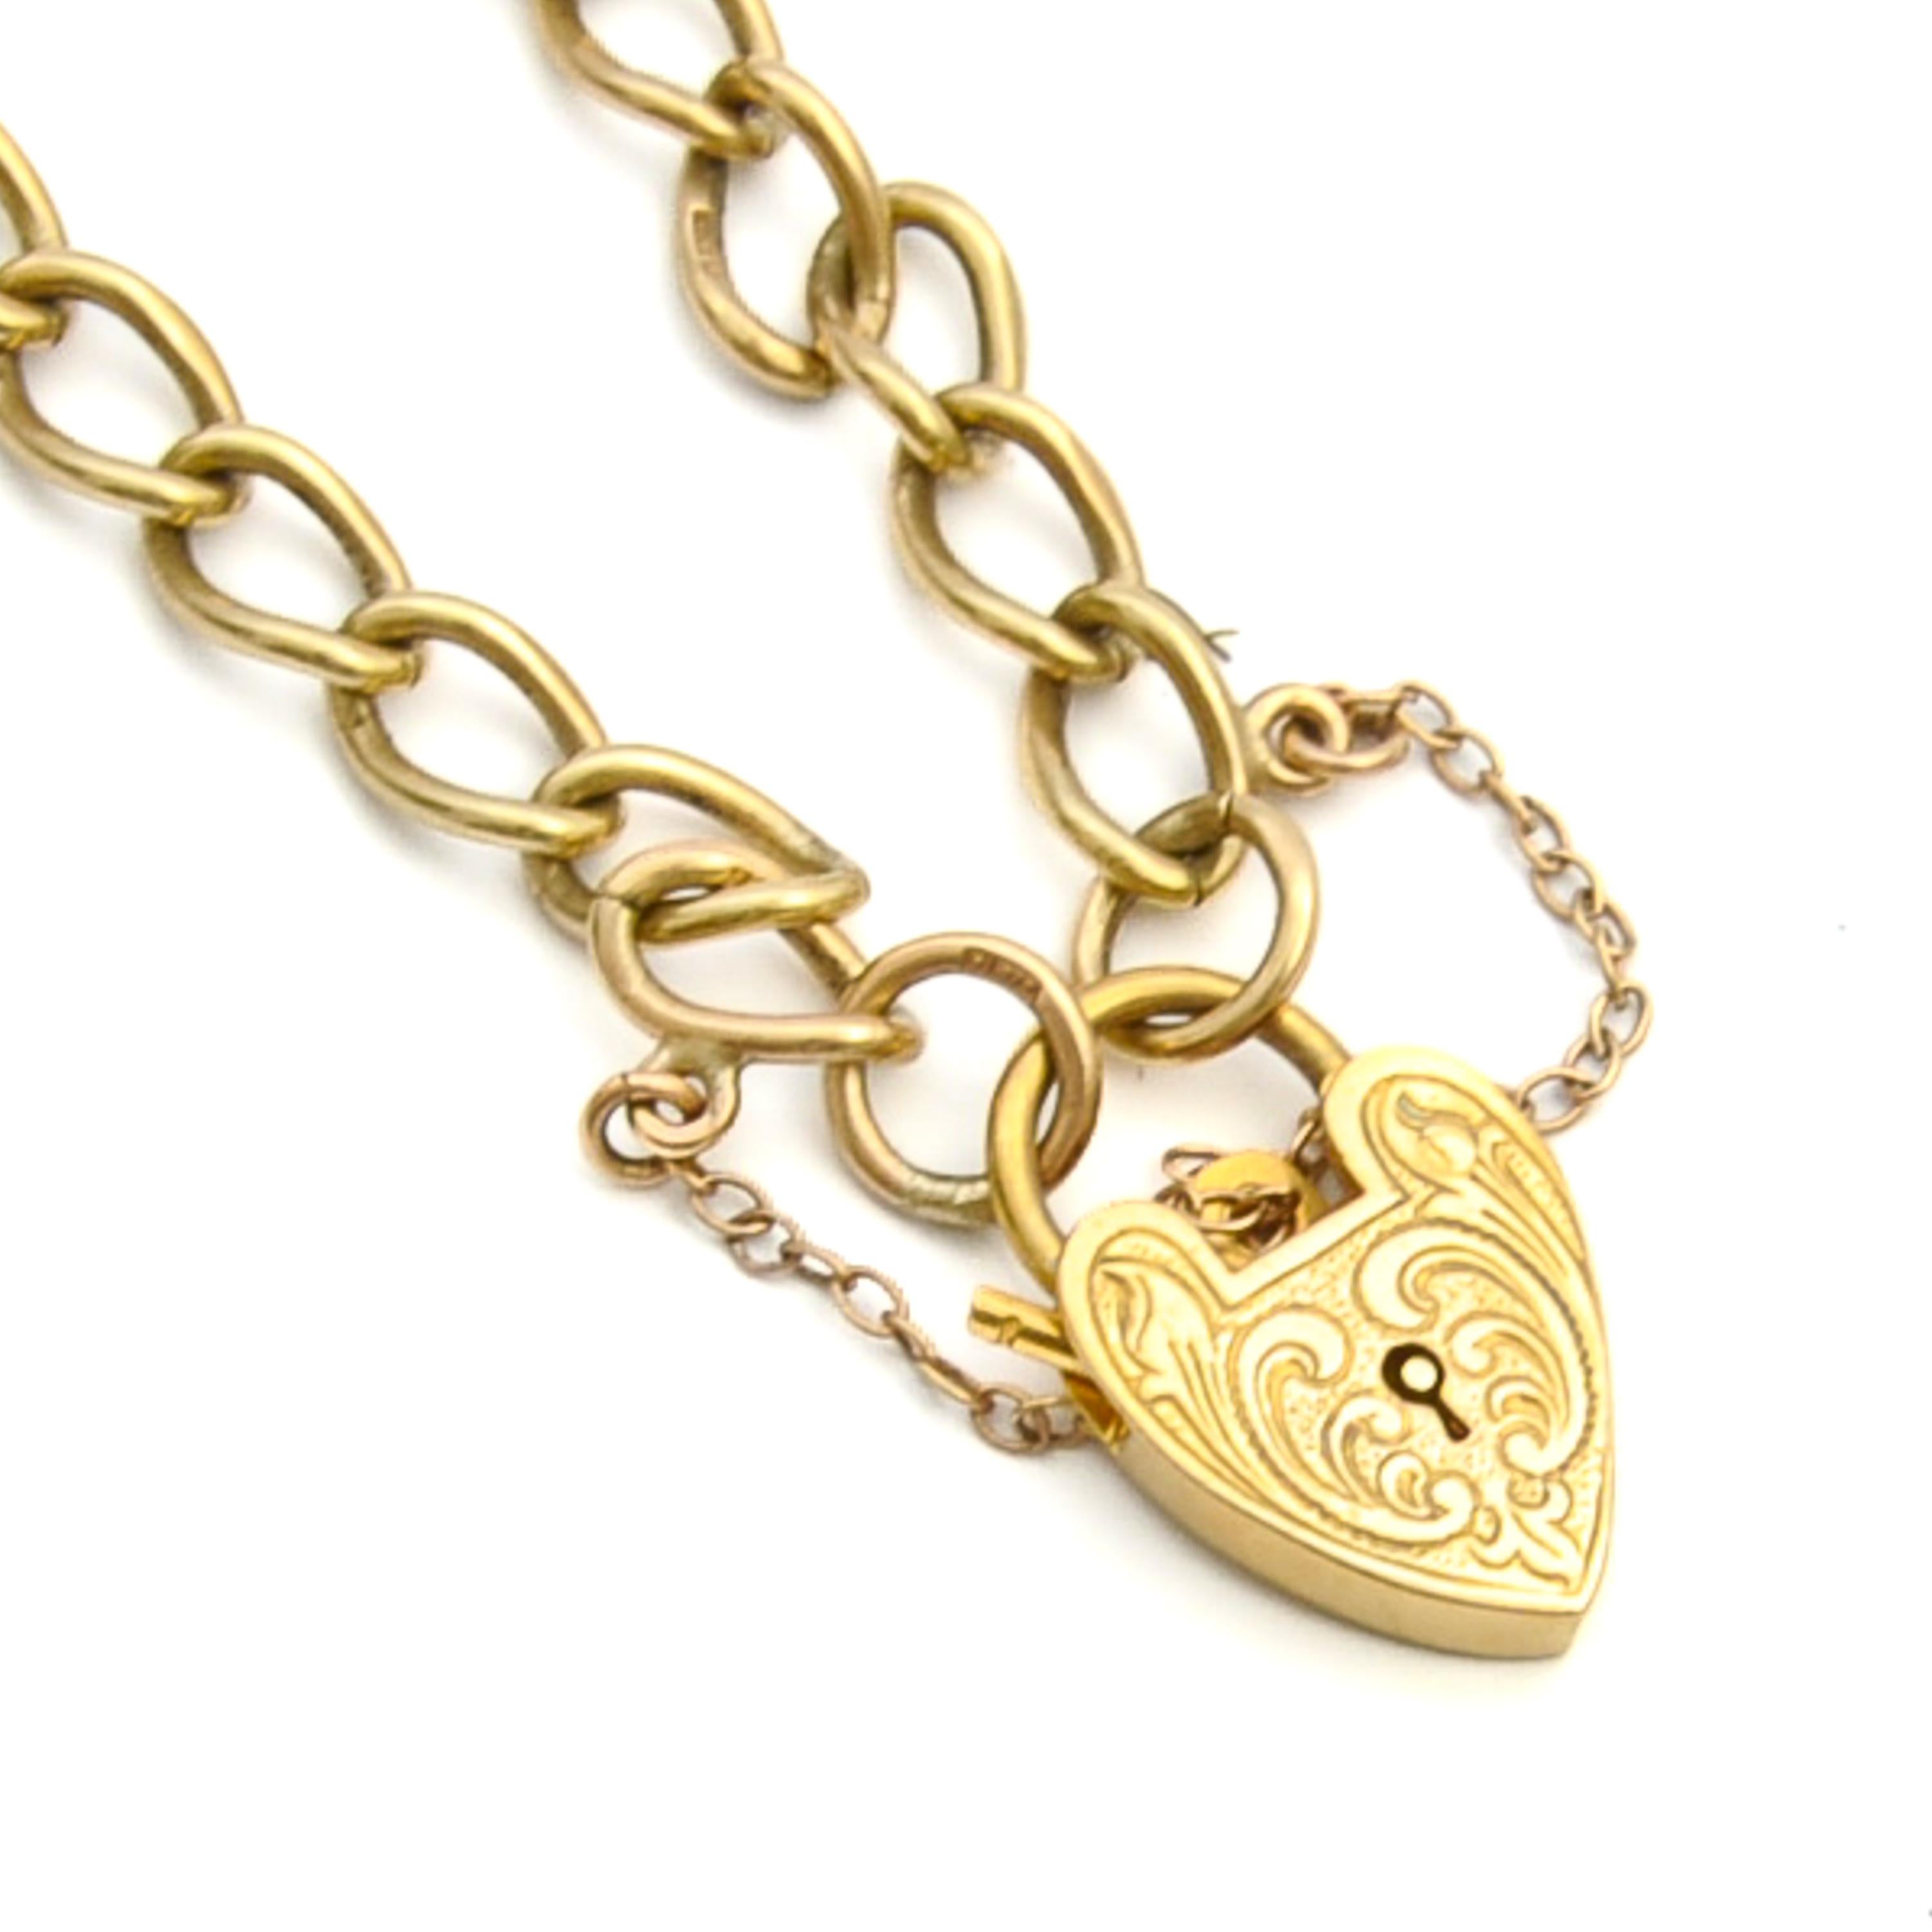 Vintage 9K Gold Heart Padlock Curb Chain Charms Bracelet In Good Condition For Sale In Rotterdam, NL